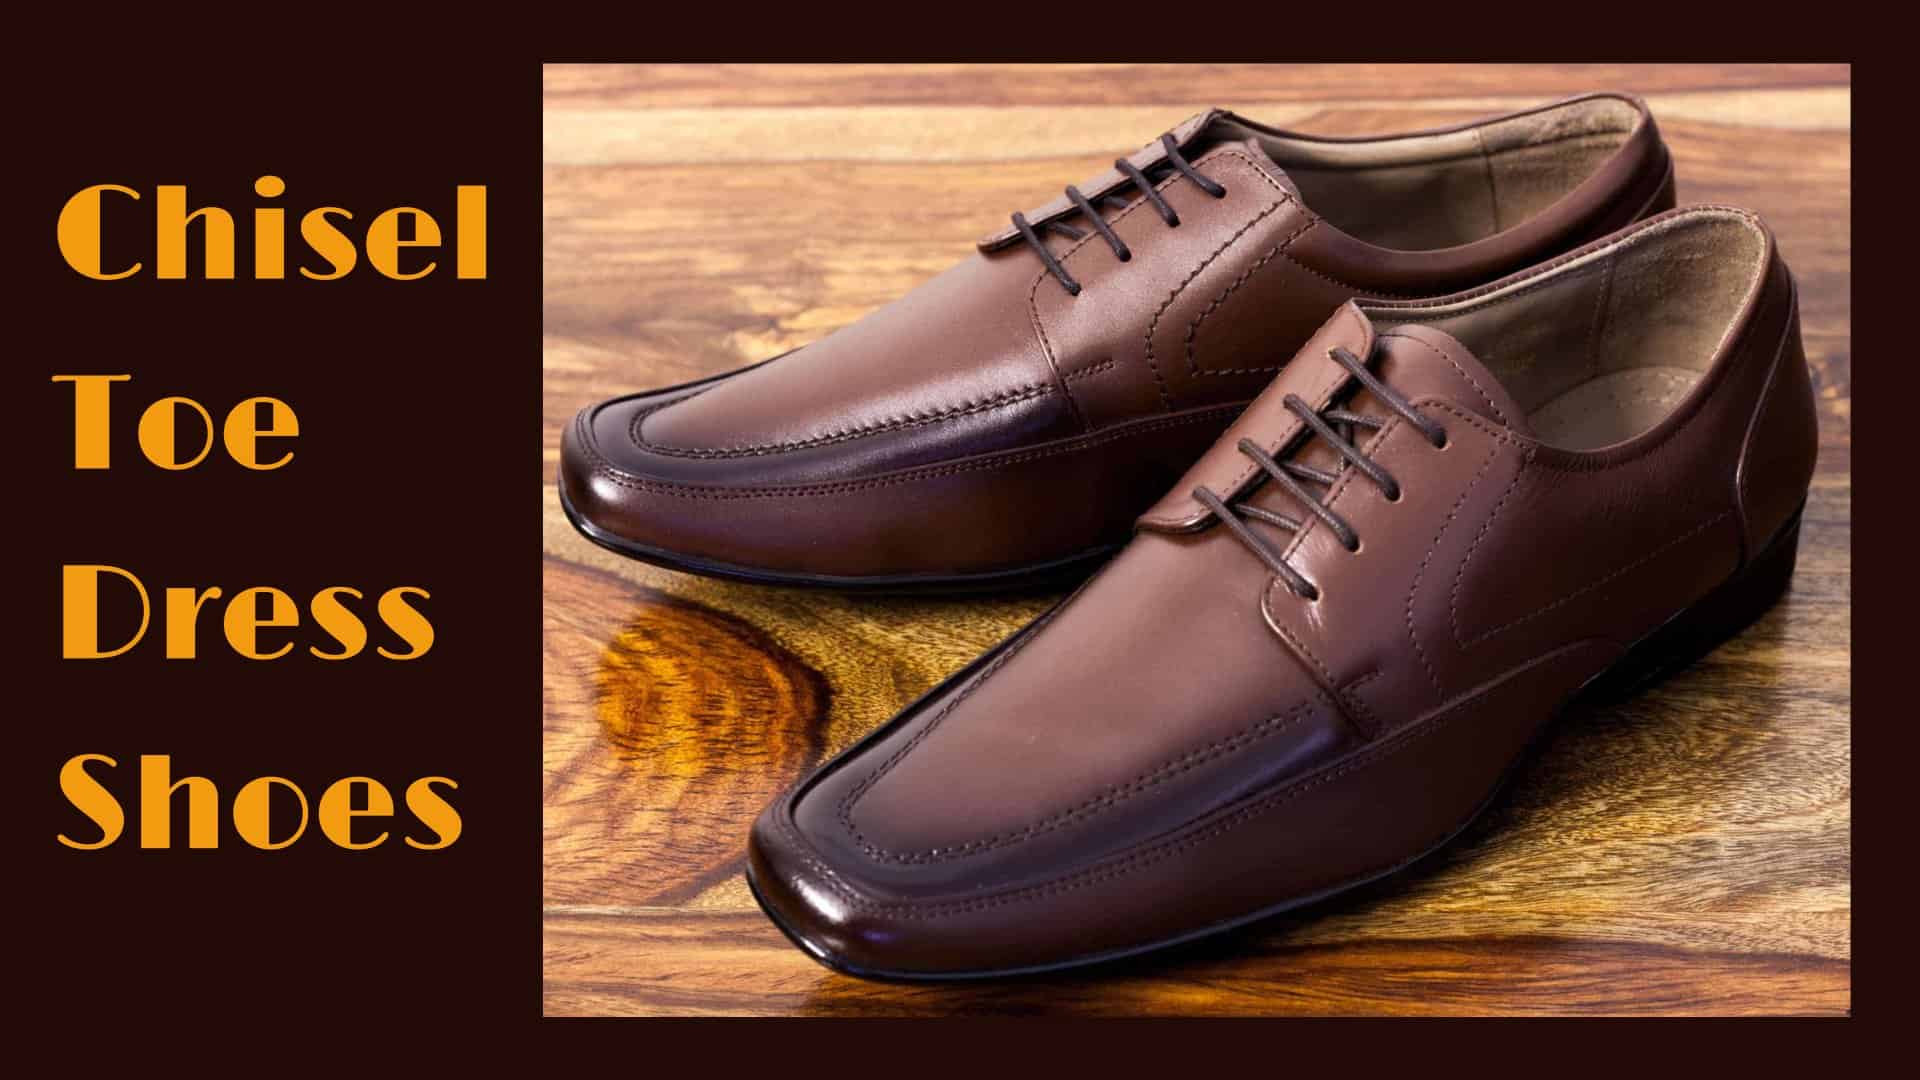 All You Need To Know About Dress Shoes - Men's Style